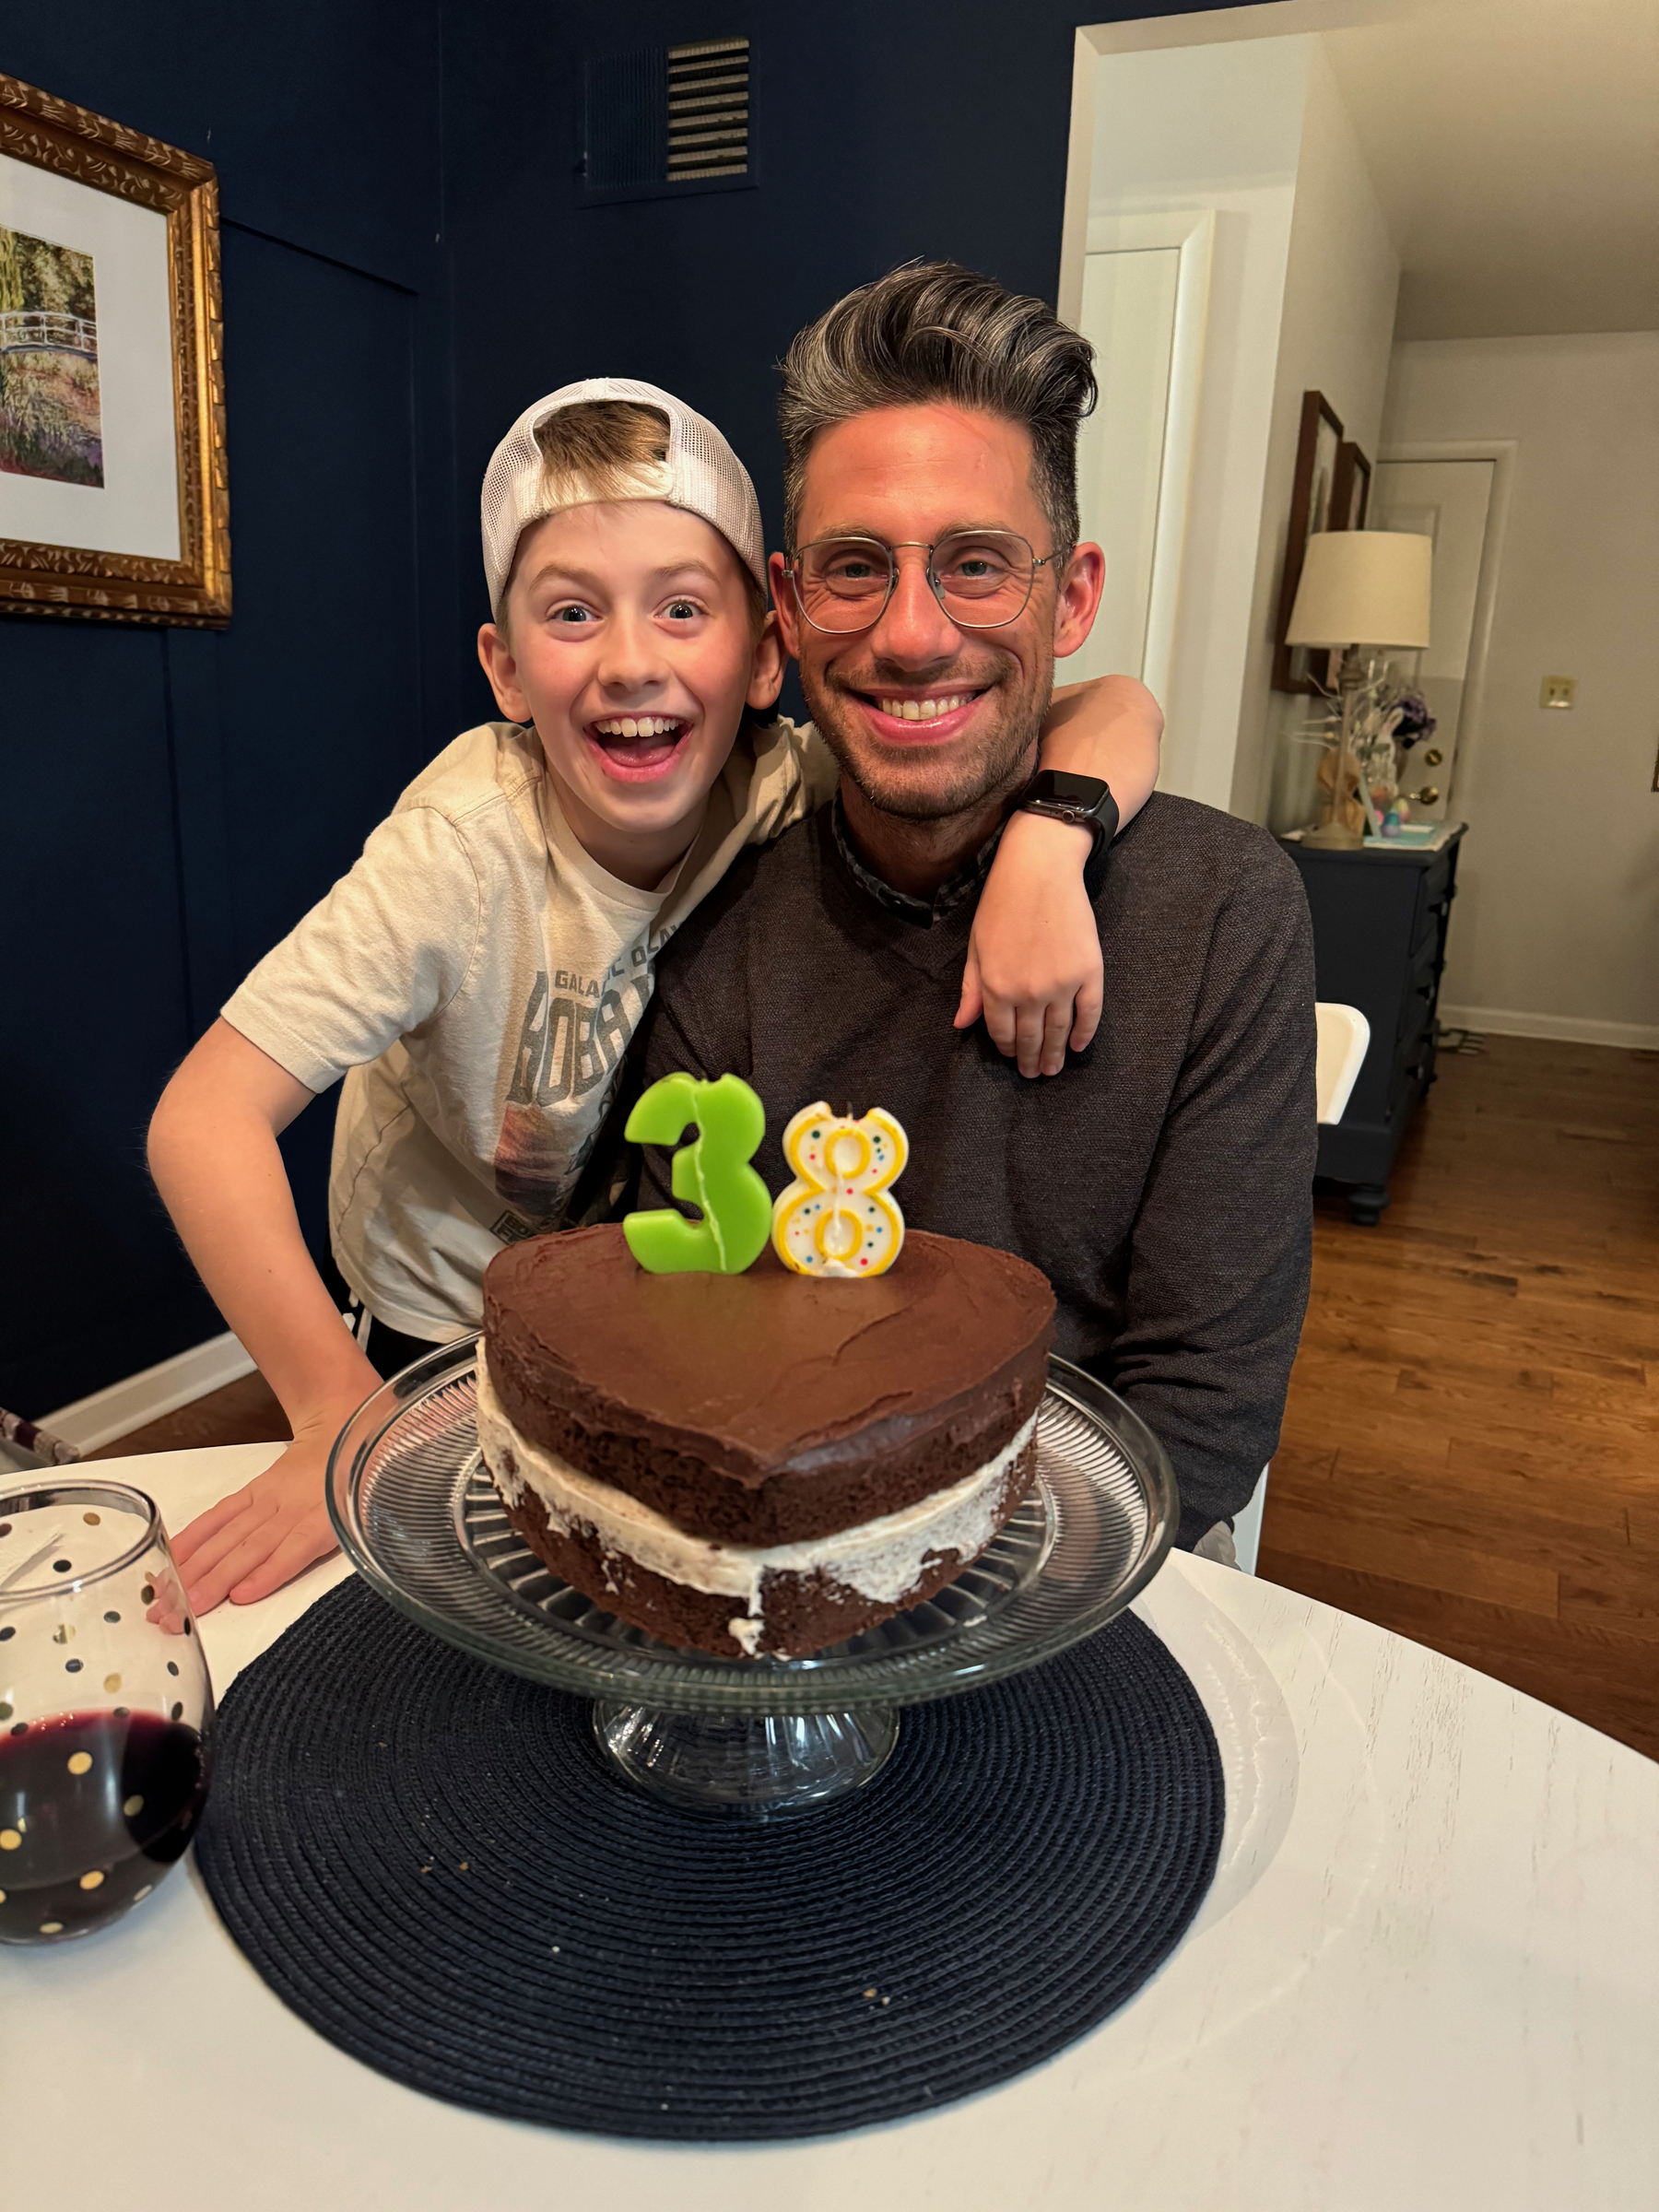 Mozzie and I with the chocolate birthday cake he helped make for me. Candles '3' and '8' on top to mark the date.